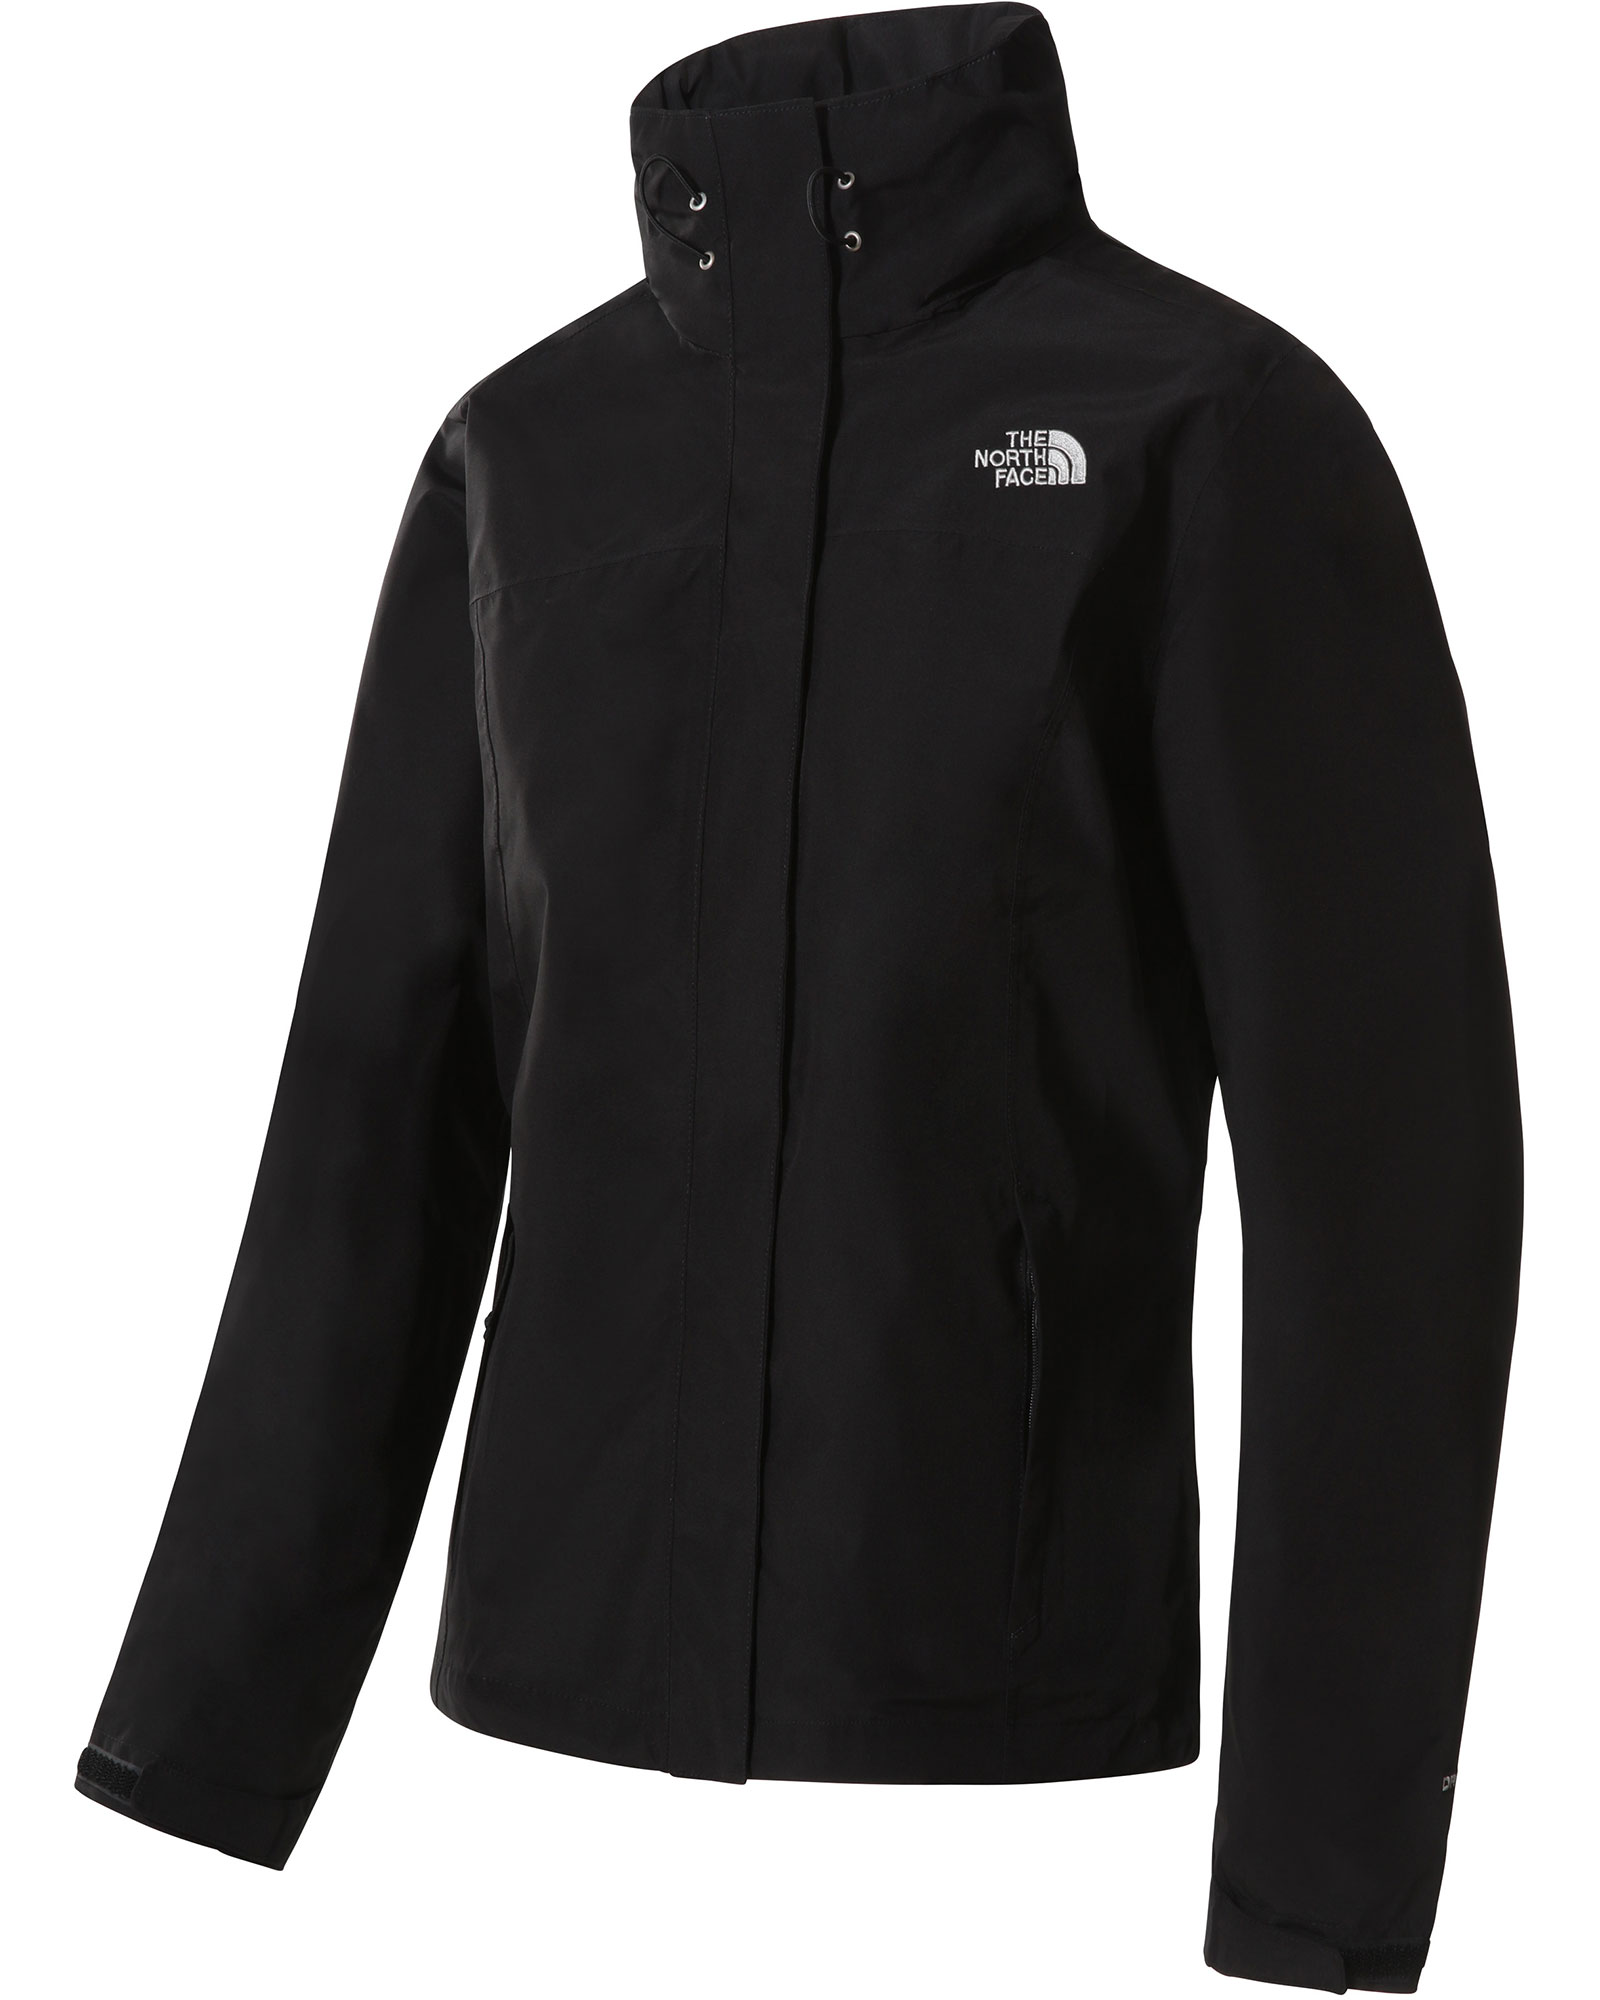 The North Face Sangro DryVent Women’s Jacket - TNF Black XS